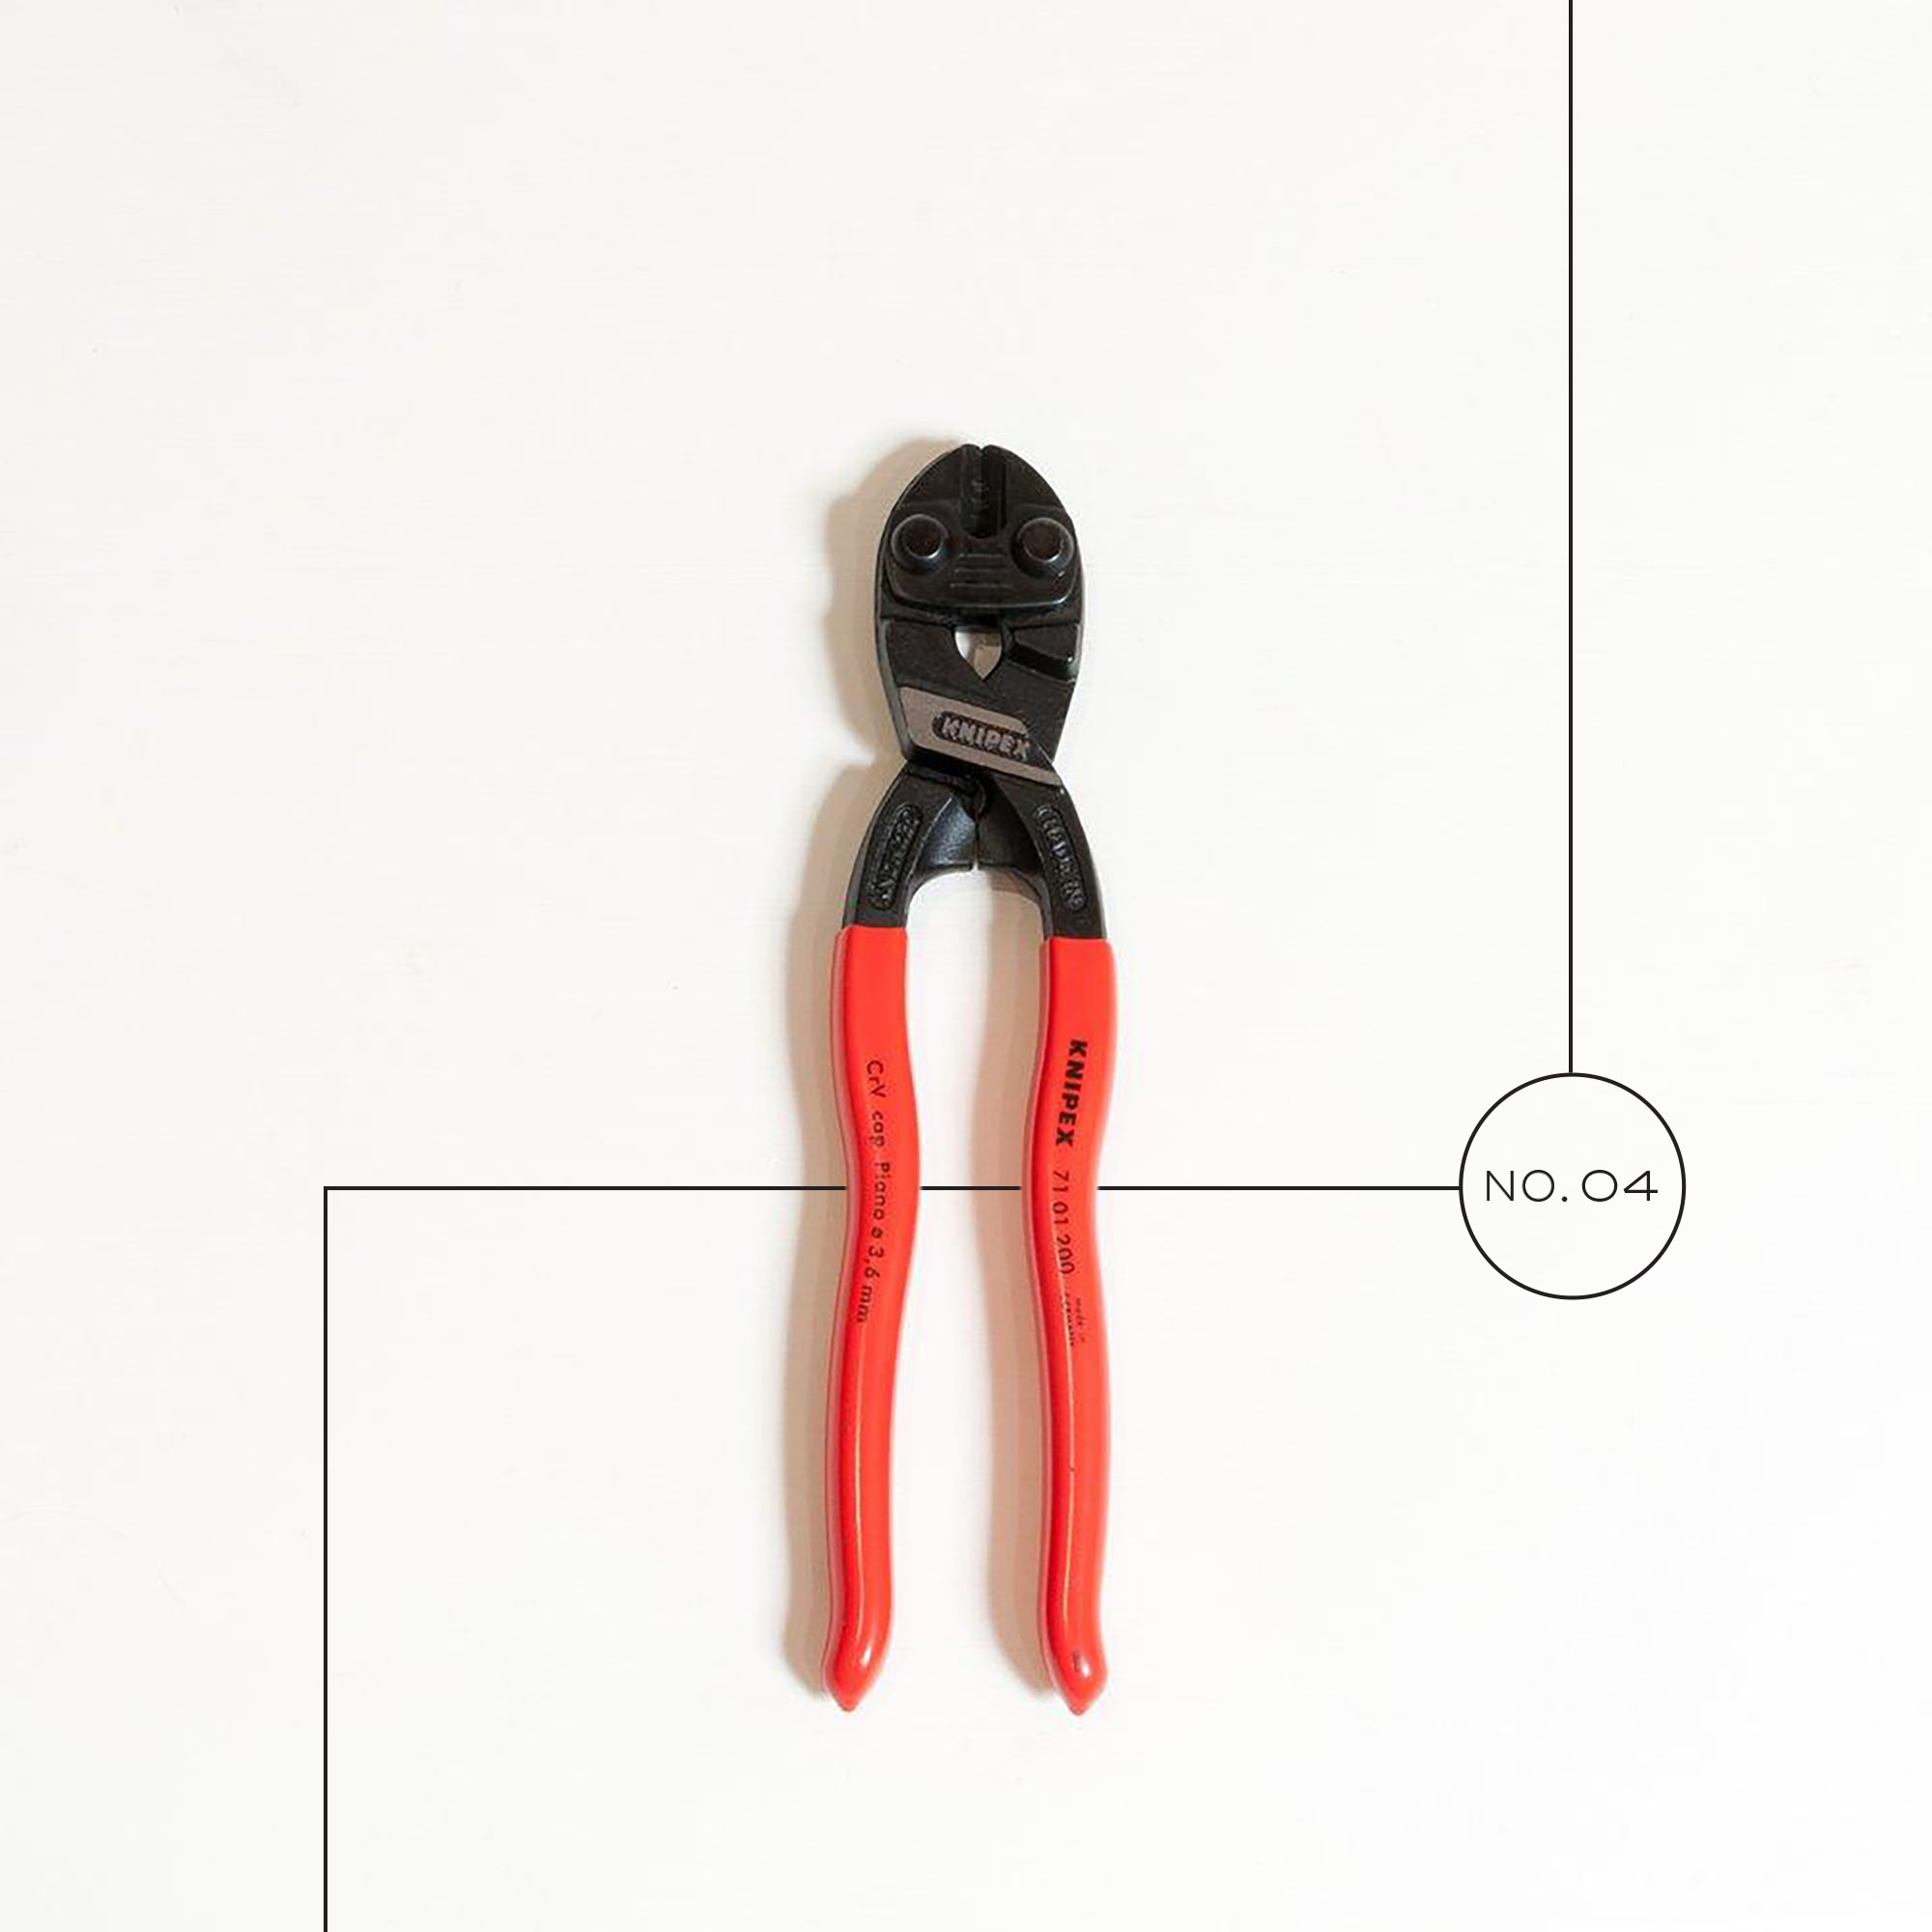 A photo of wire cutters on a white background.